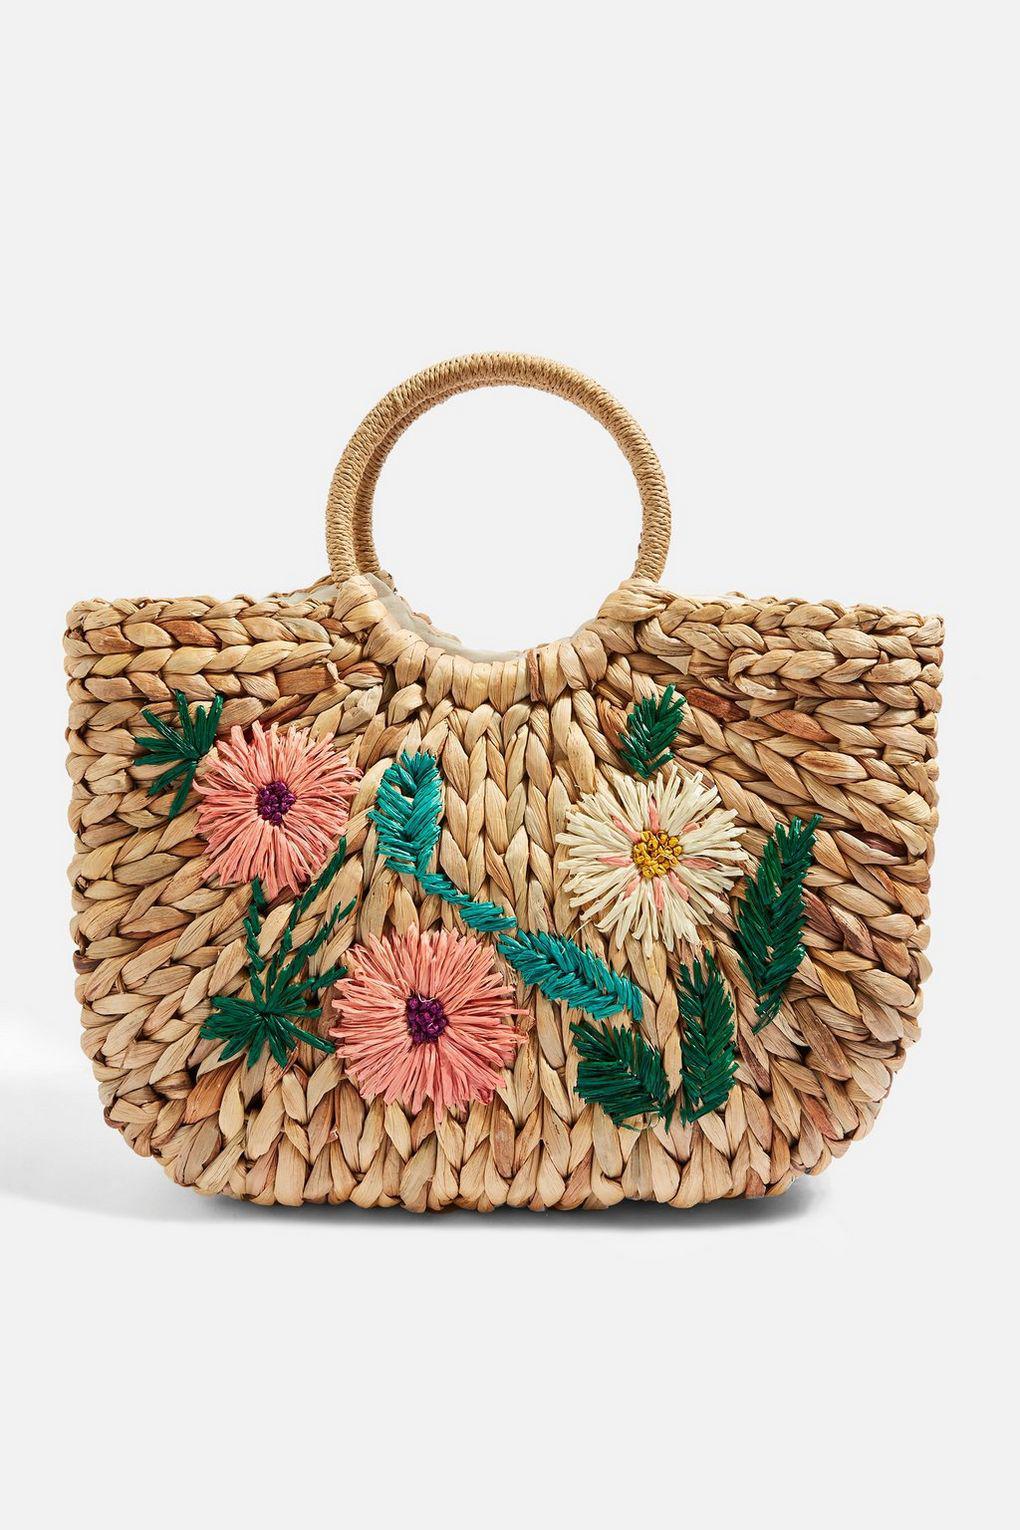 TOPSHOP Floral Embroidered Straw Tote Bag - Lyst